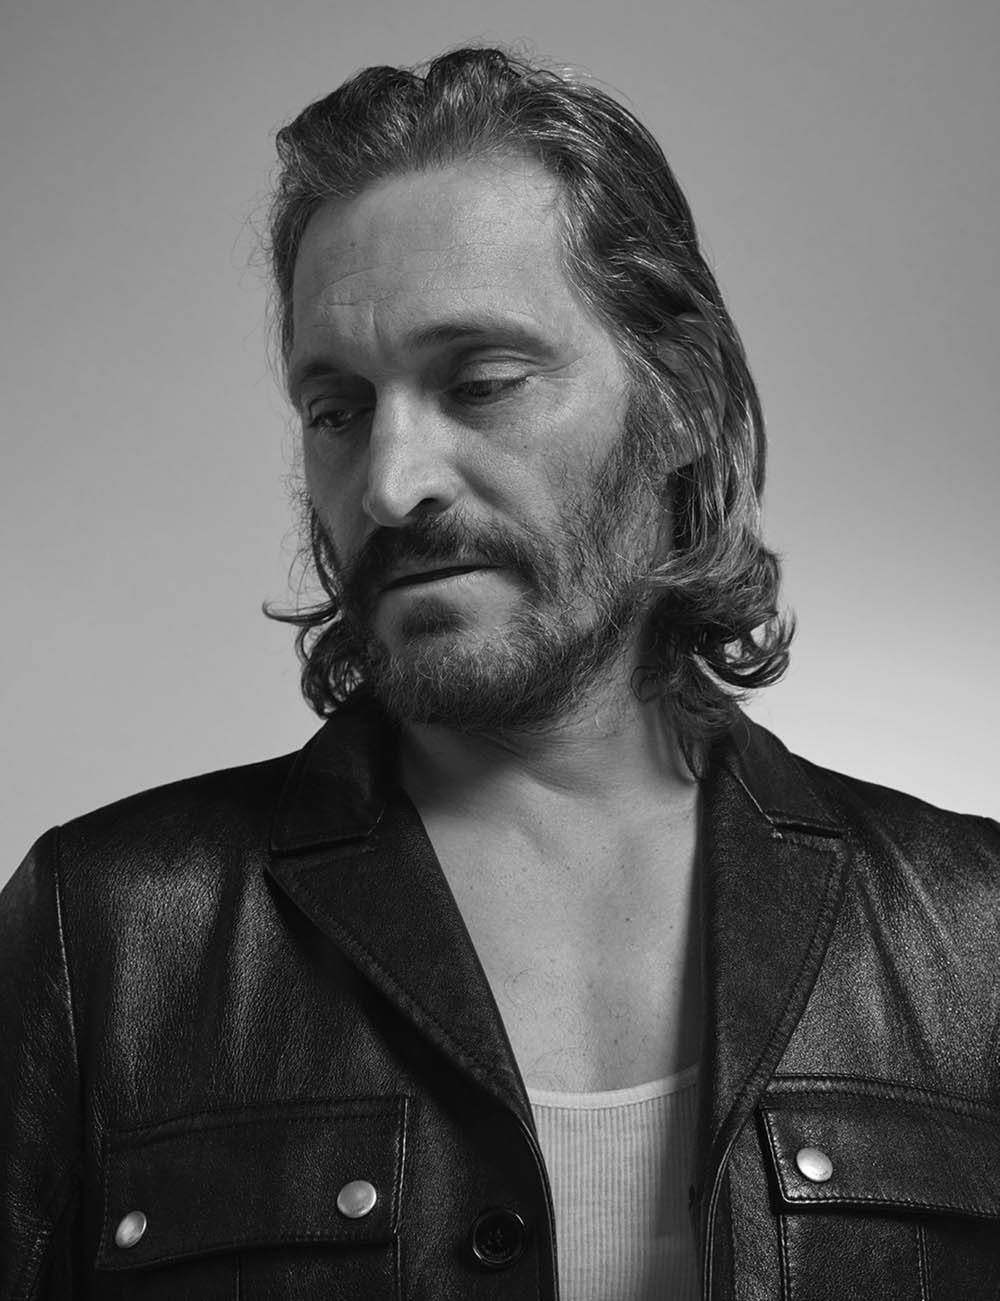 Vincent Gallo covers AnOther Man Spring Summer 2018 by Collier Schorr